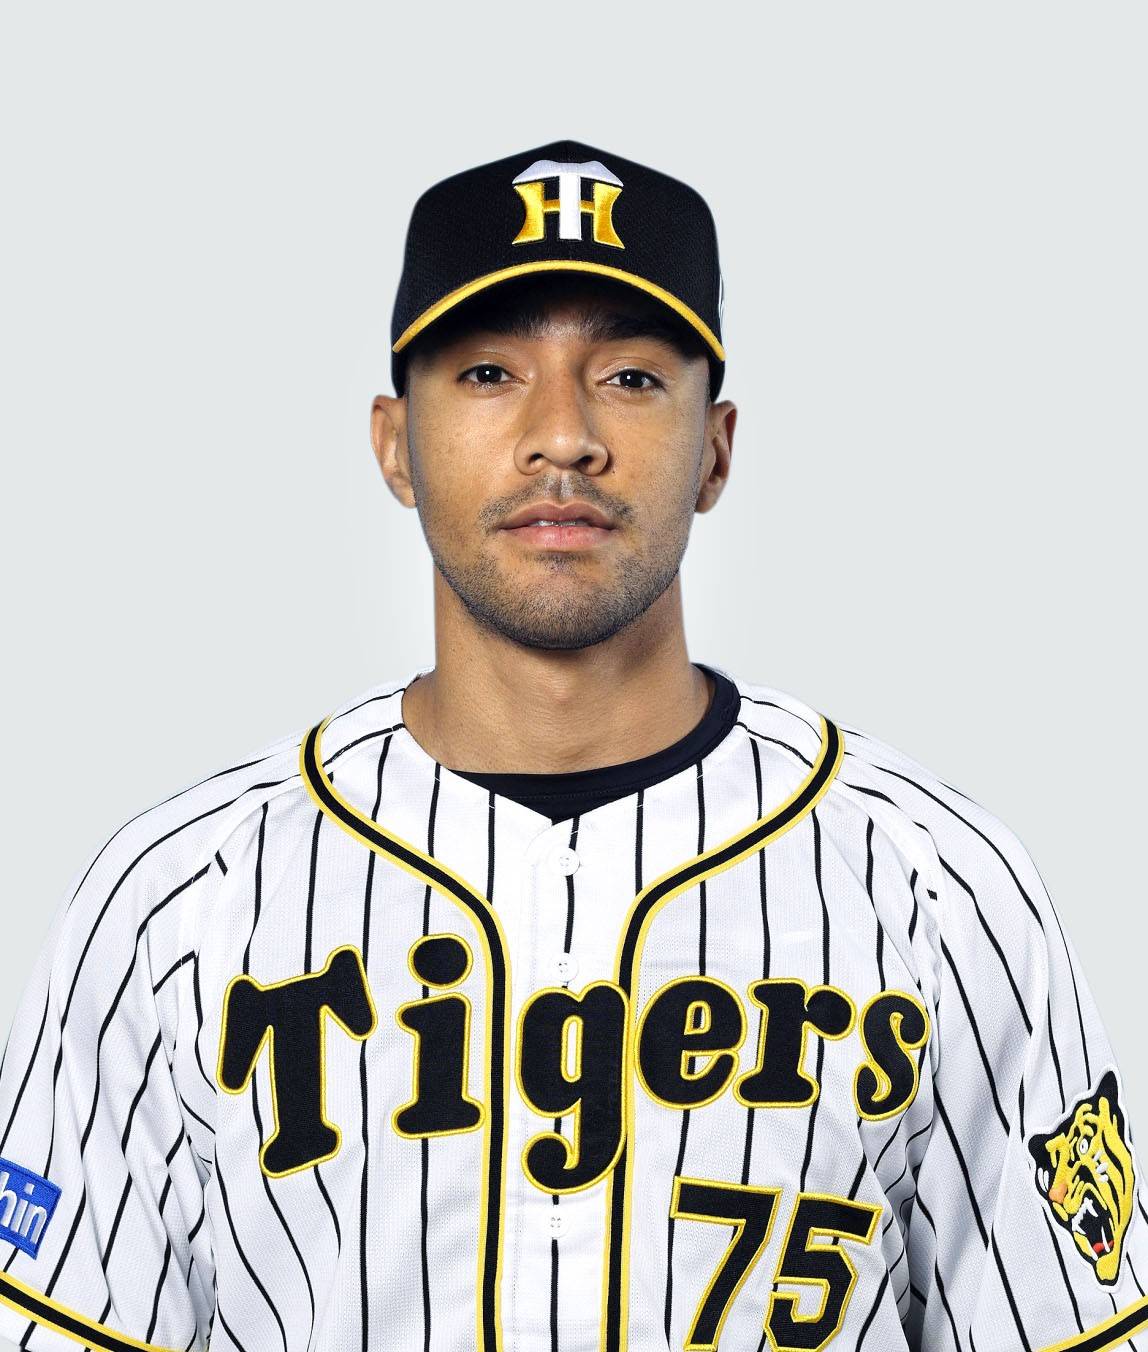 Padres sign former Hanshin closer Suarez to one-year deal - The Japan Times